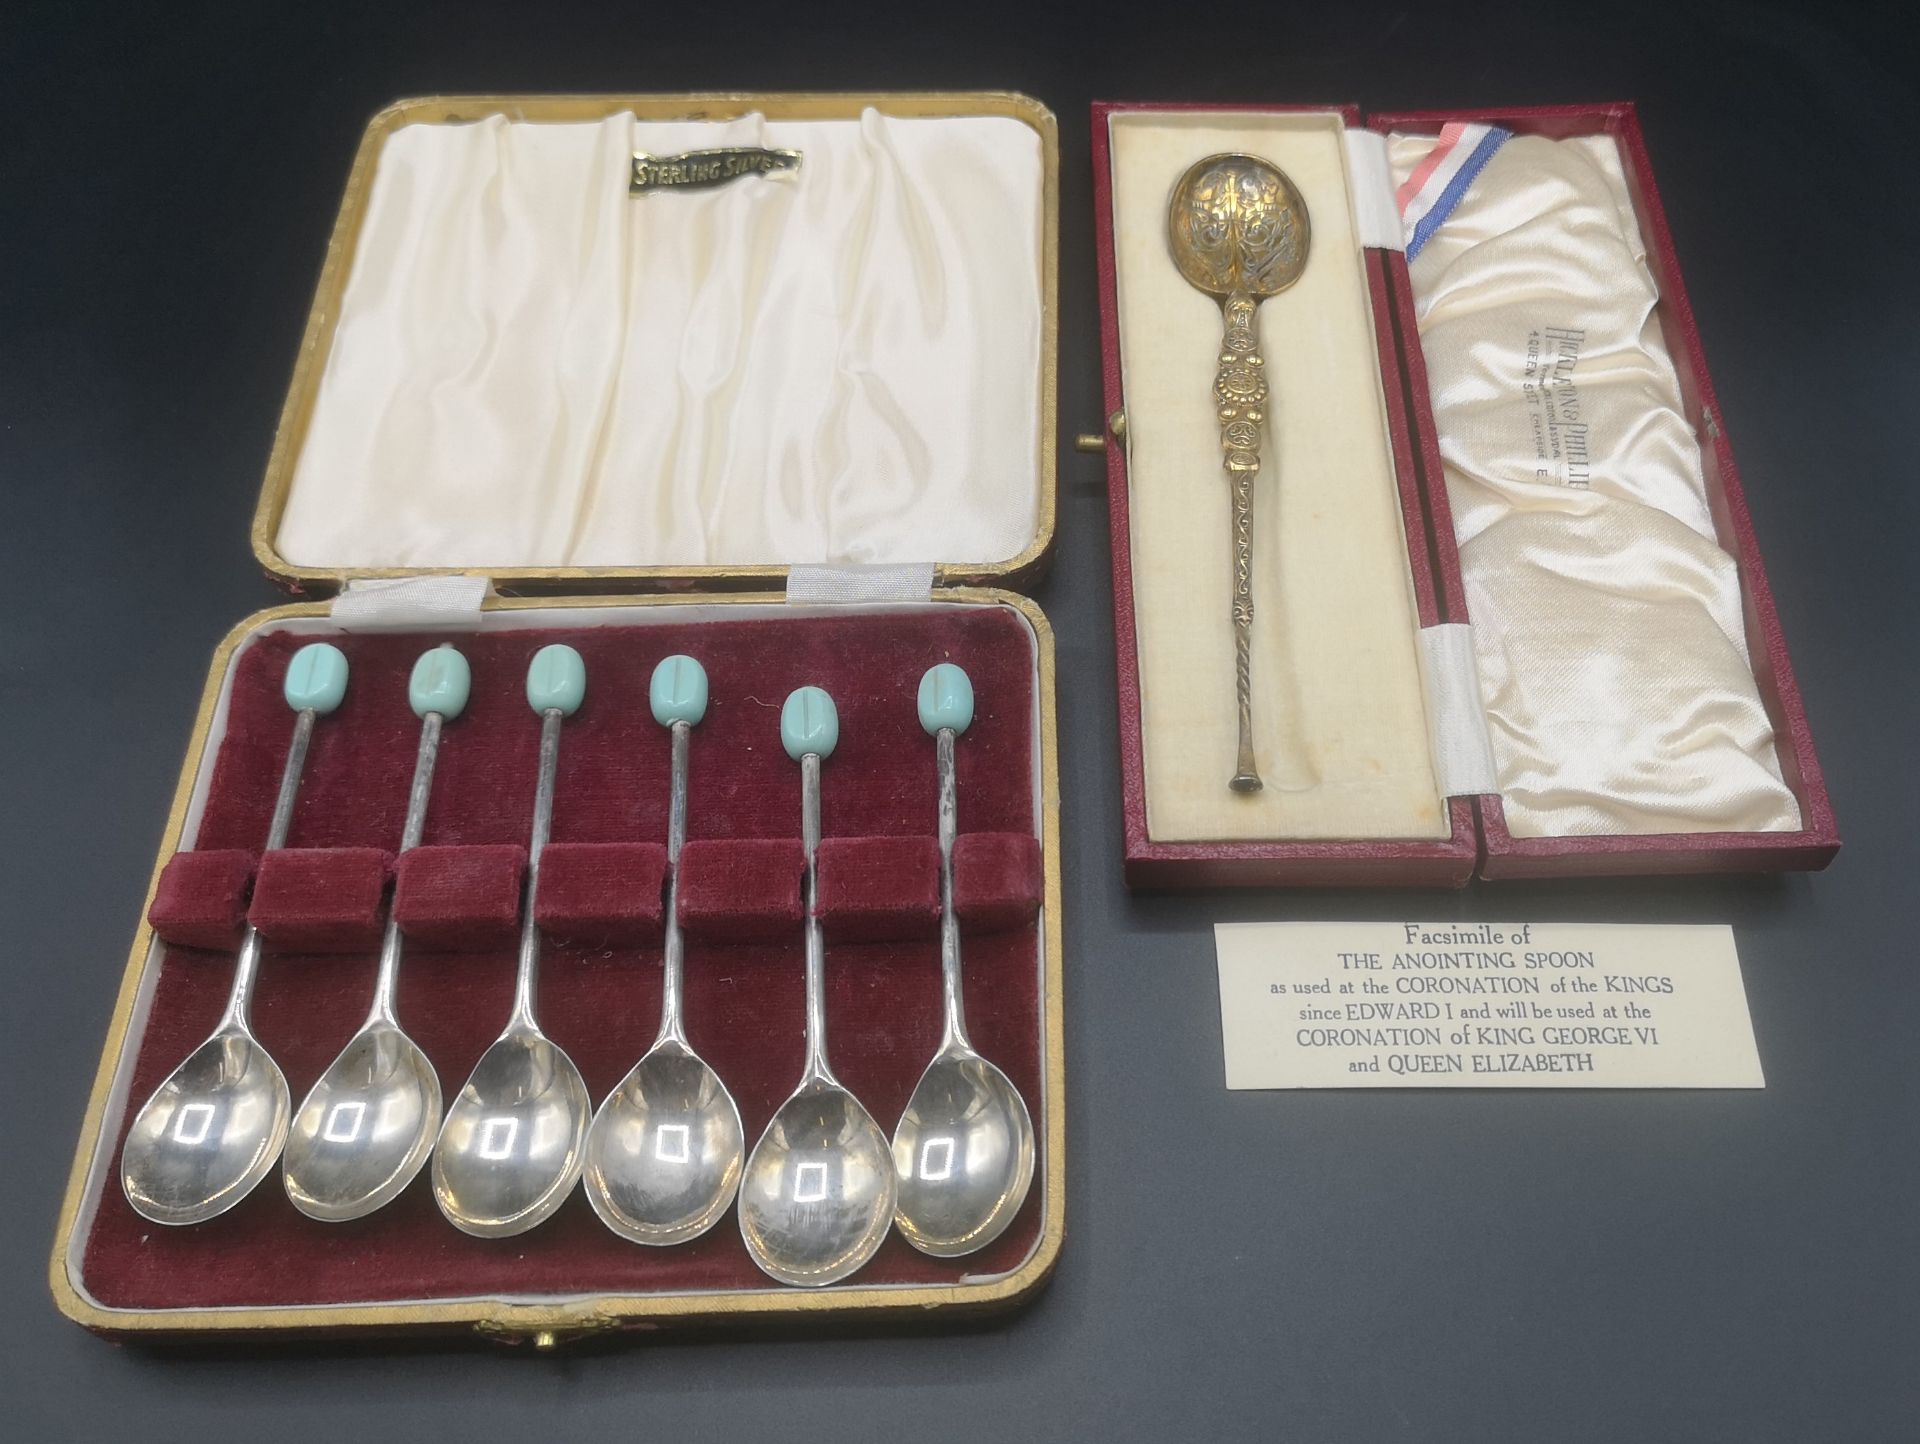 Boxed set of silver coffee spoons together with a silver gilt anointing spoon